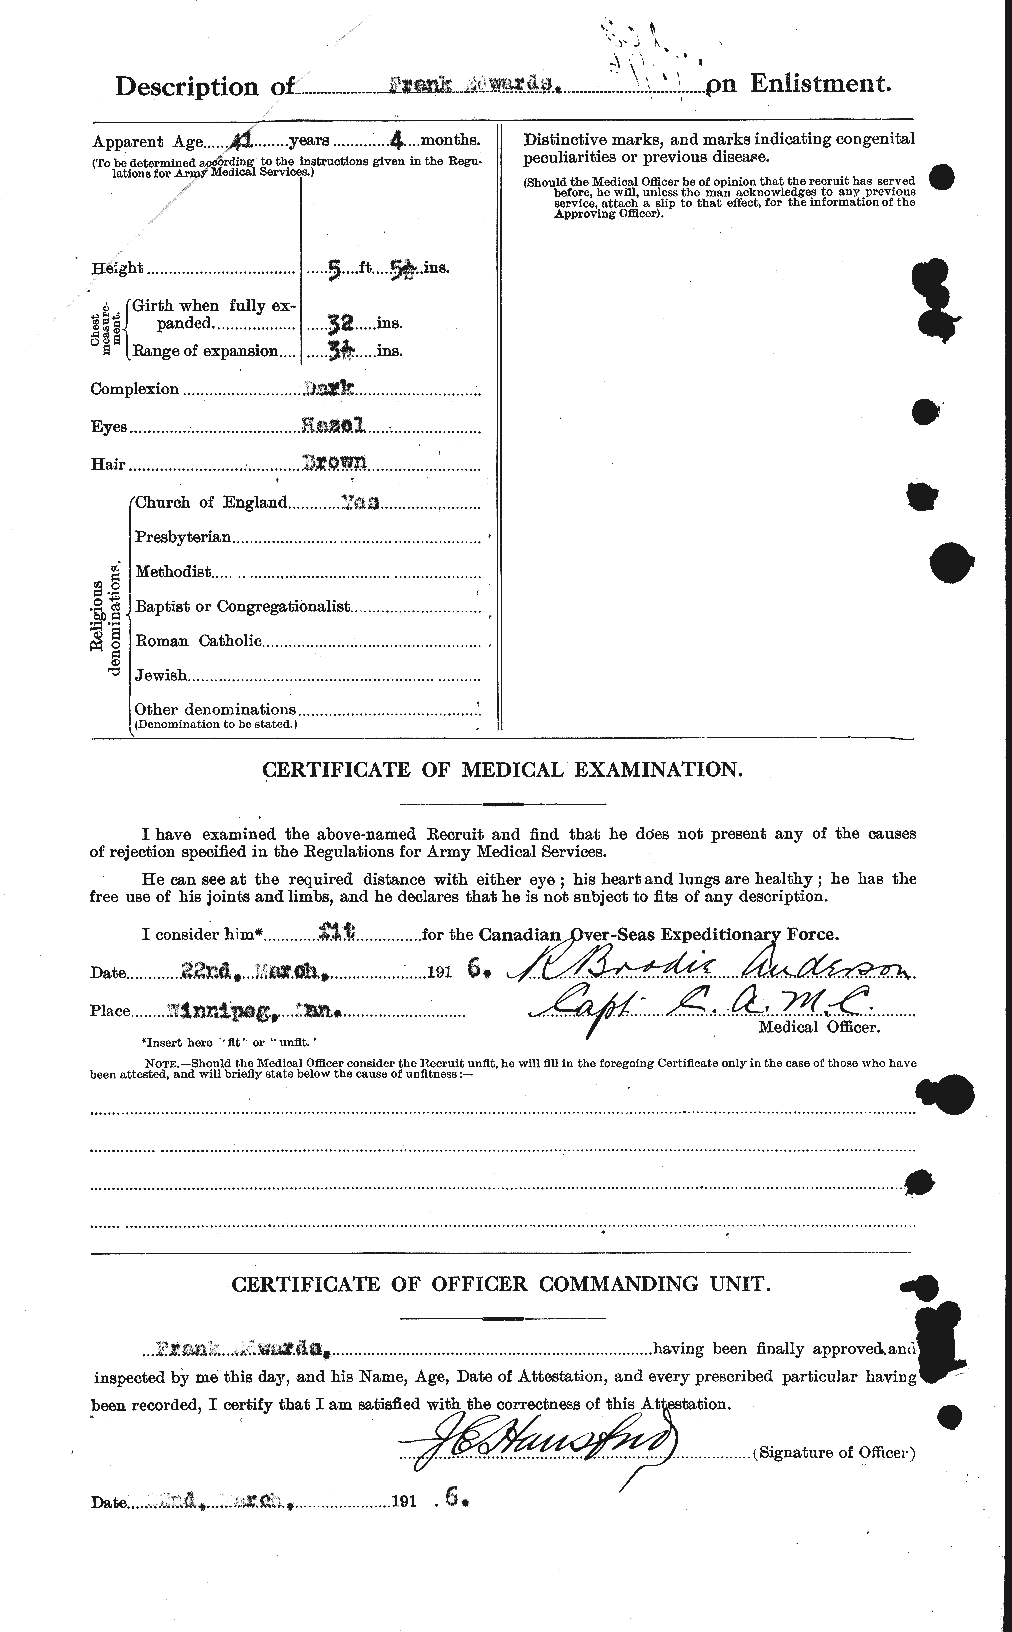 Personnel Records of the First World War - CEF 309045b